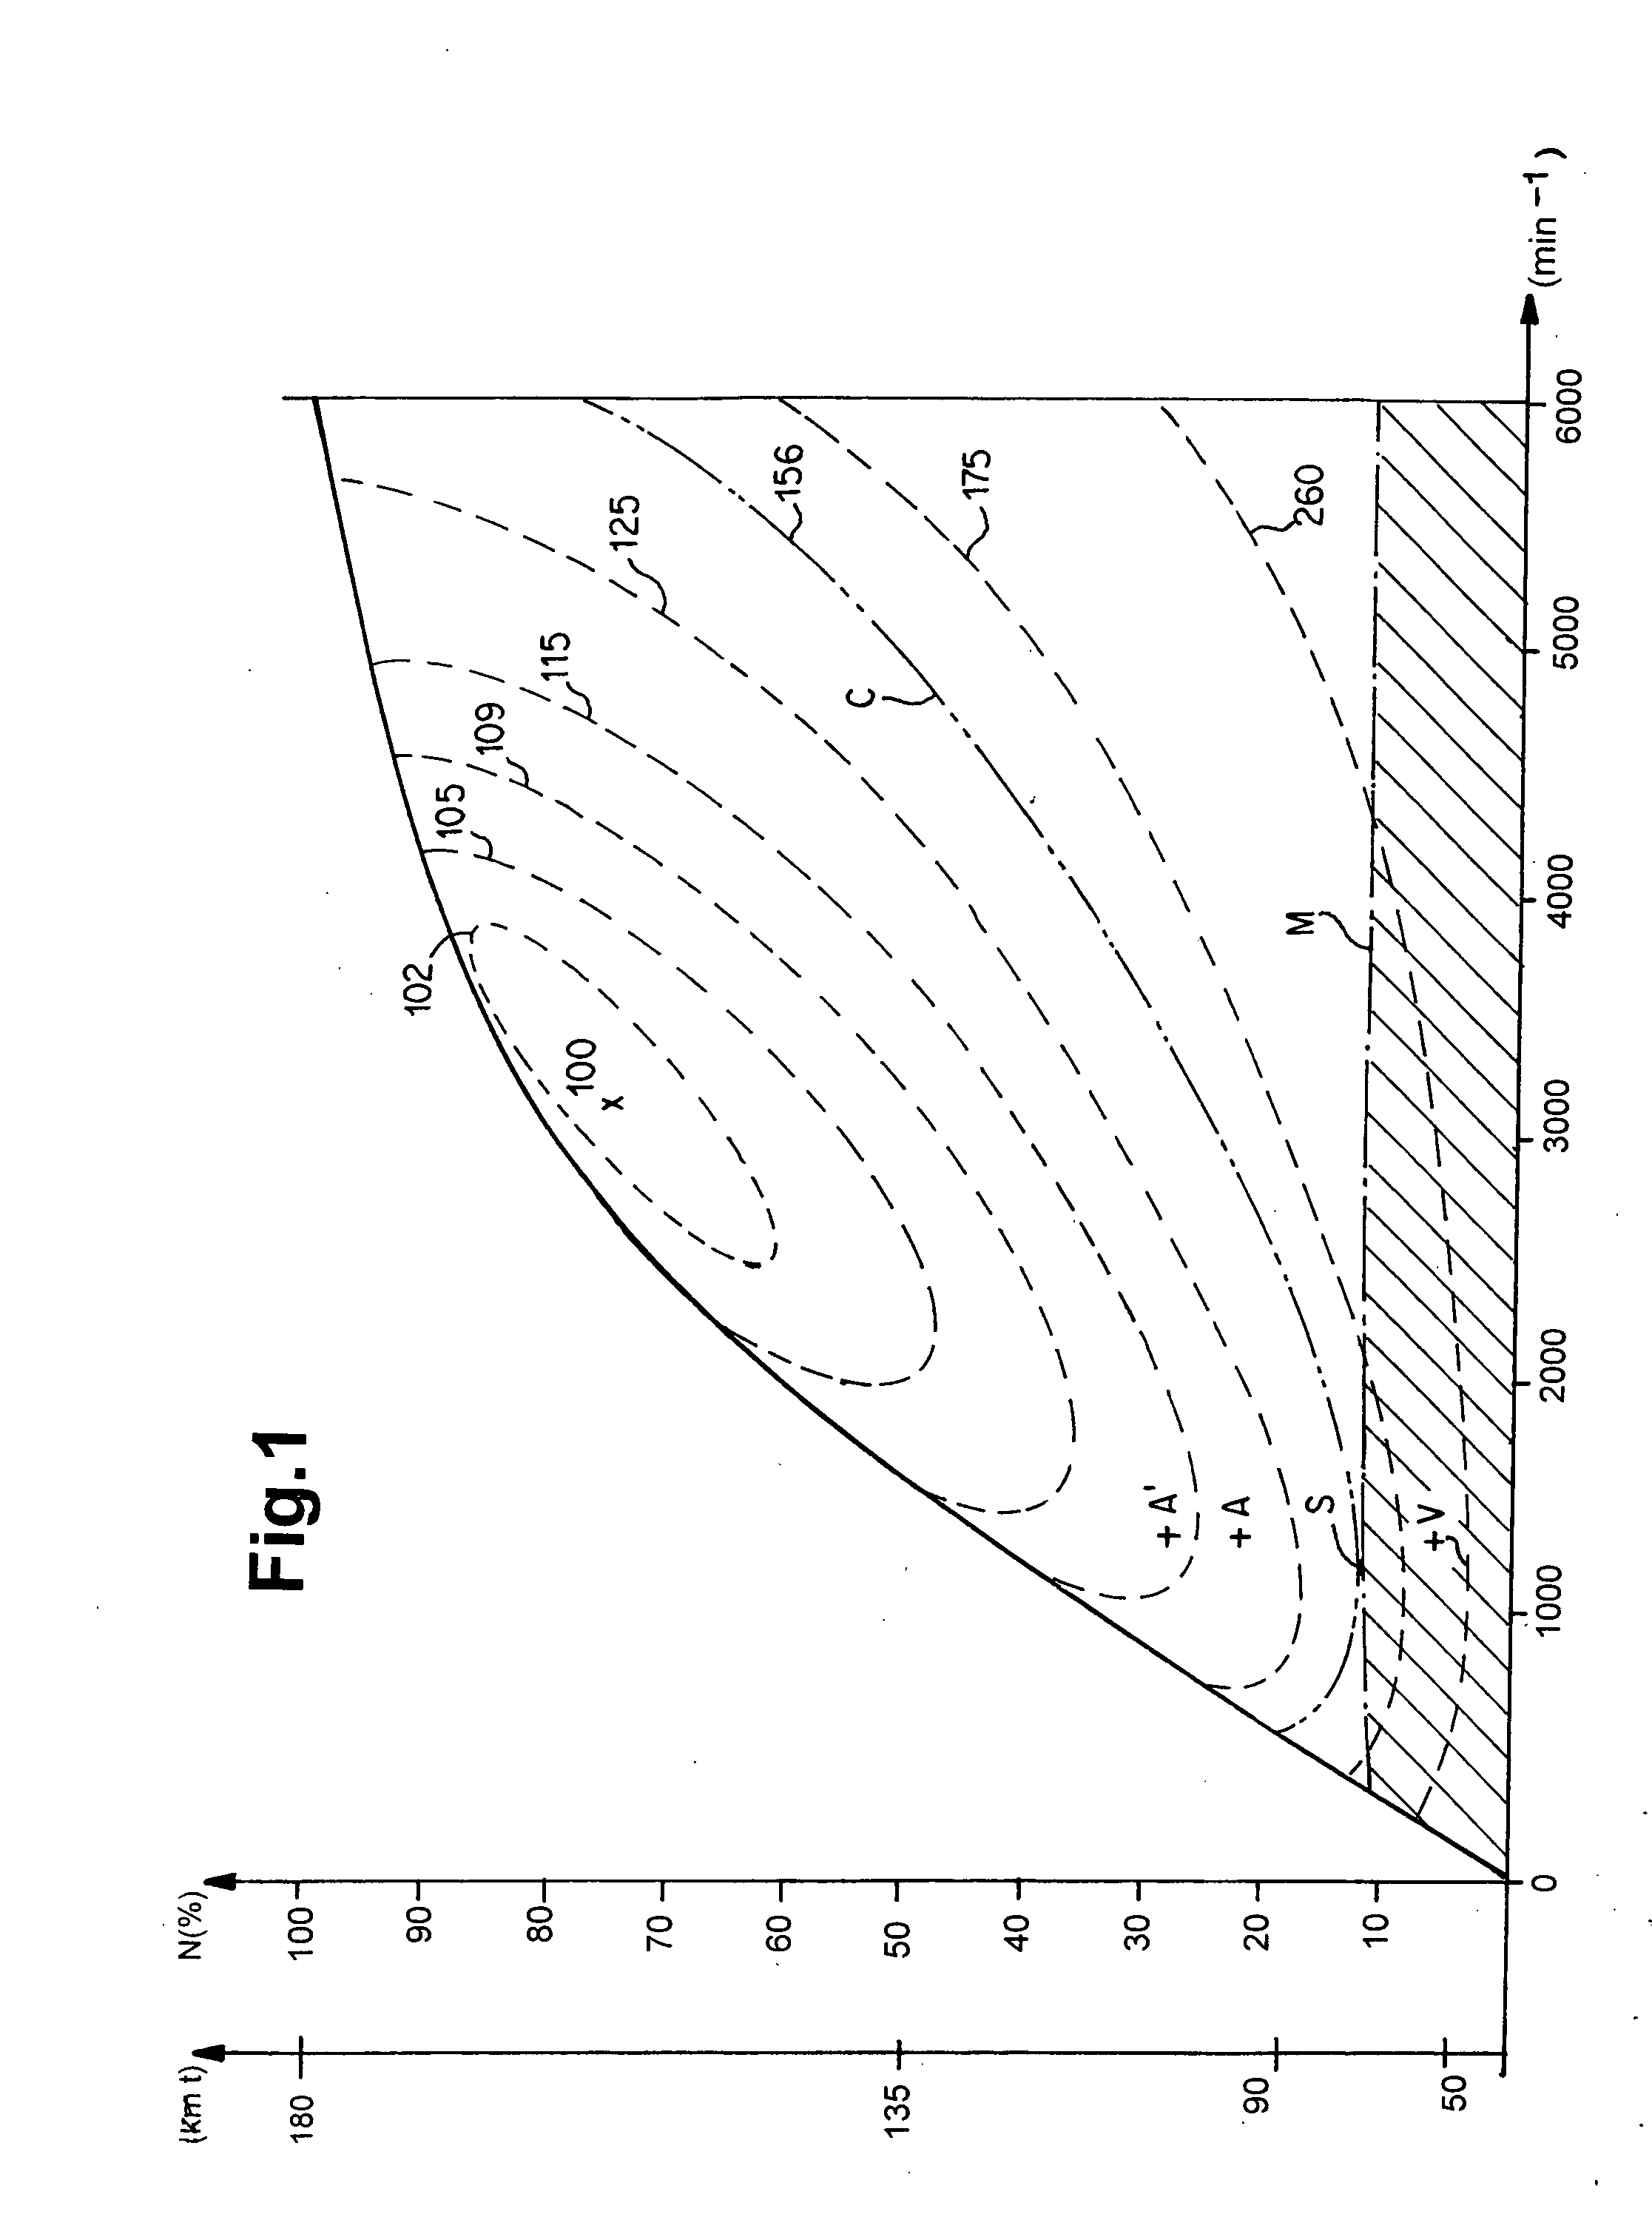 Hybrid drive system for a motor vehicle